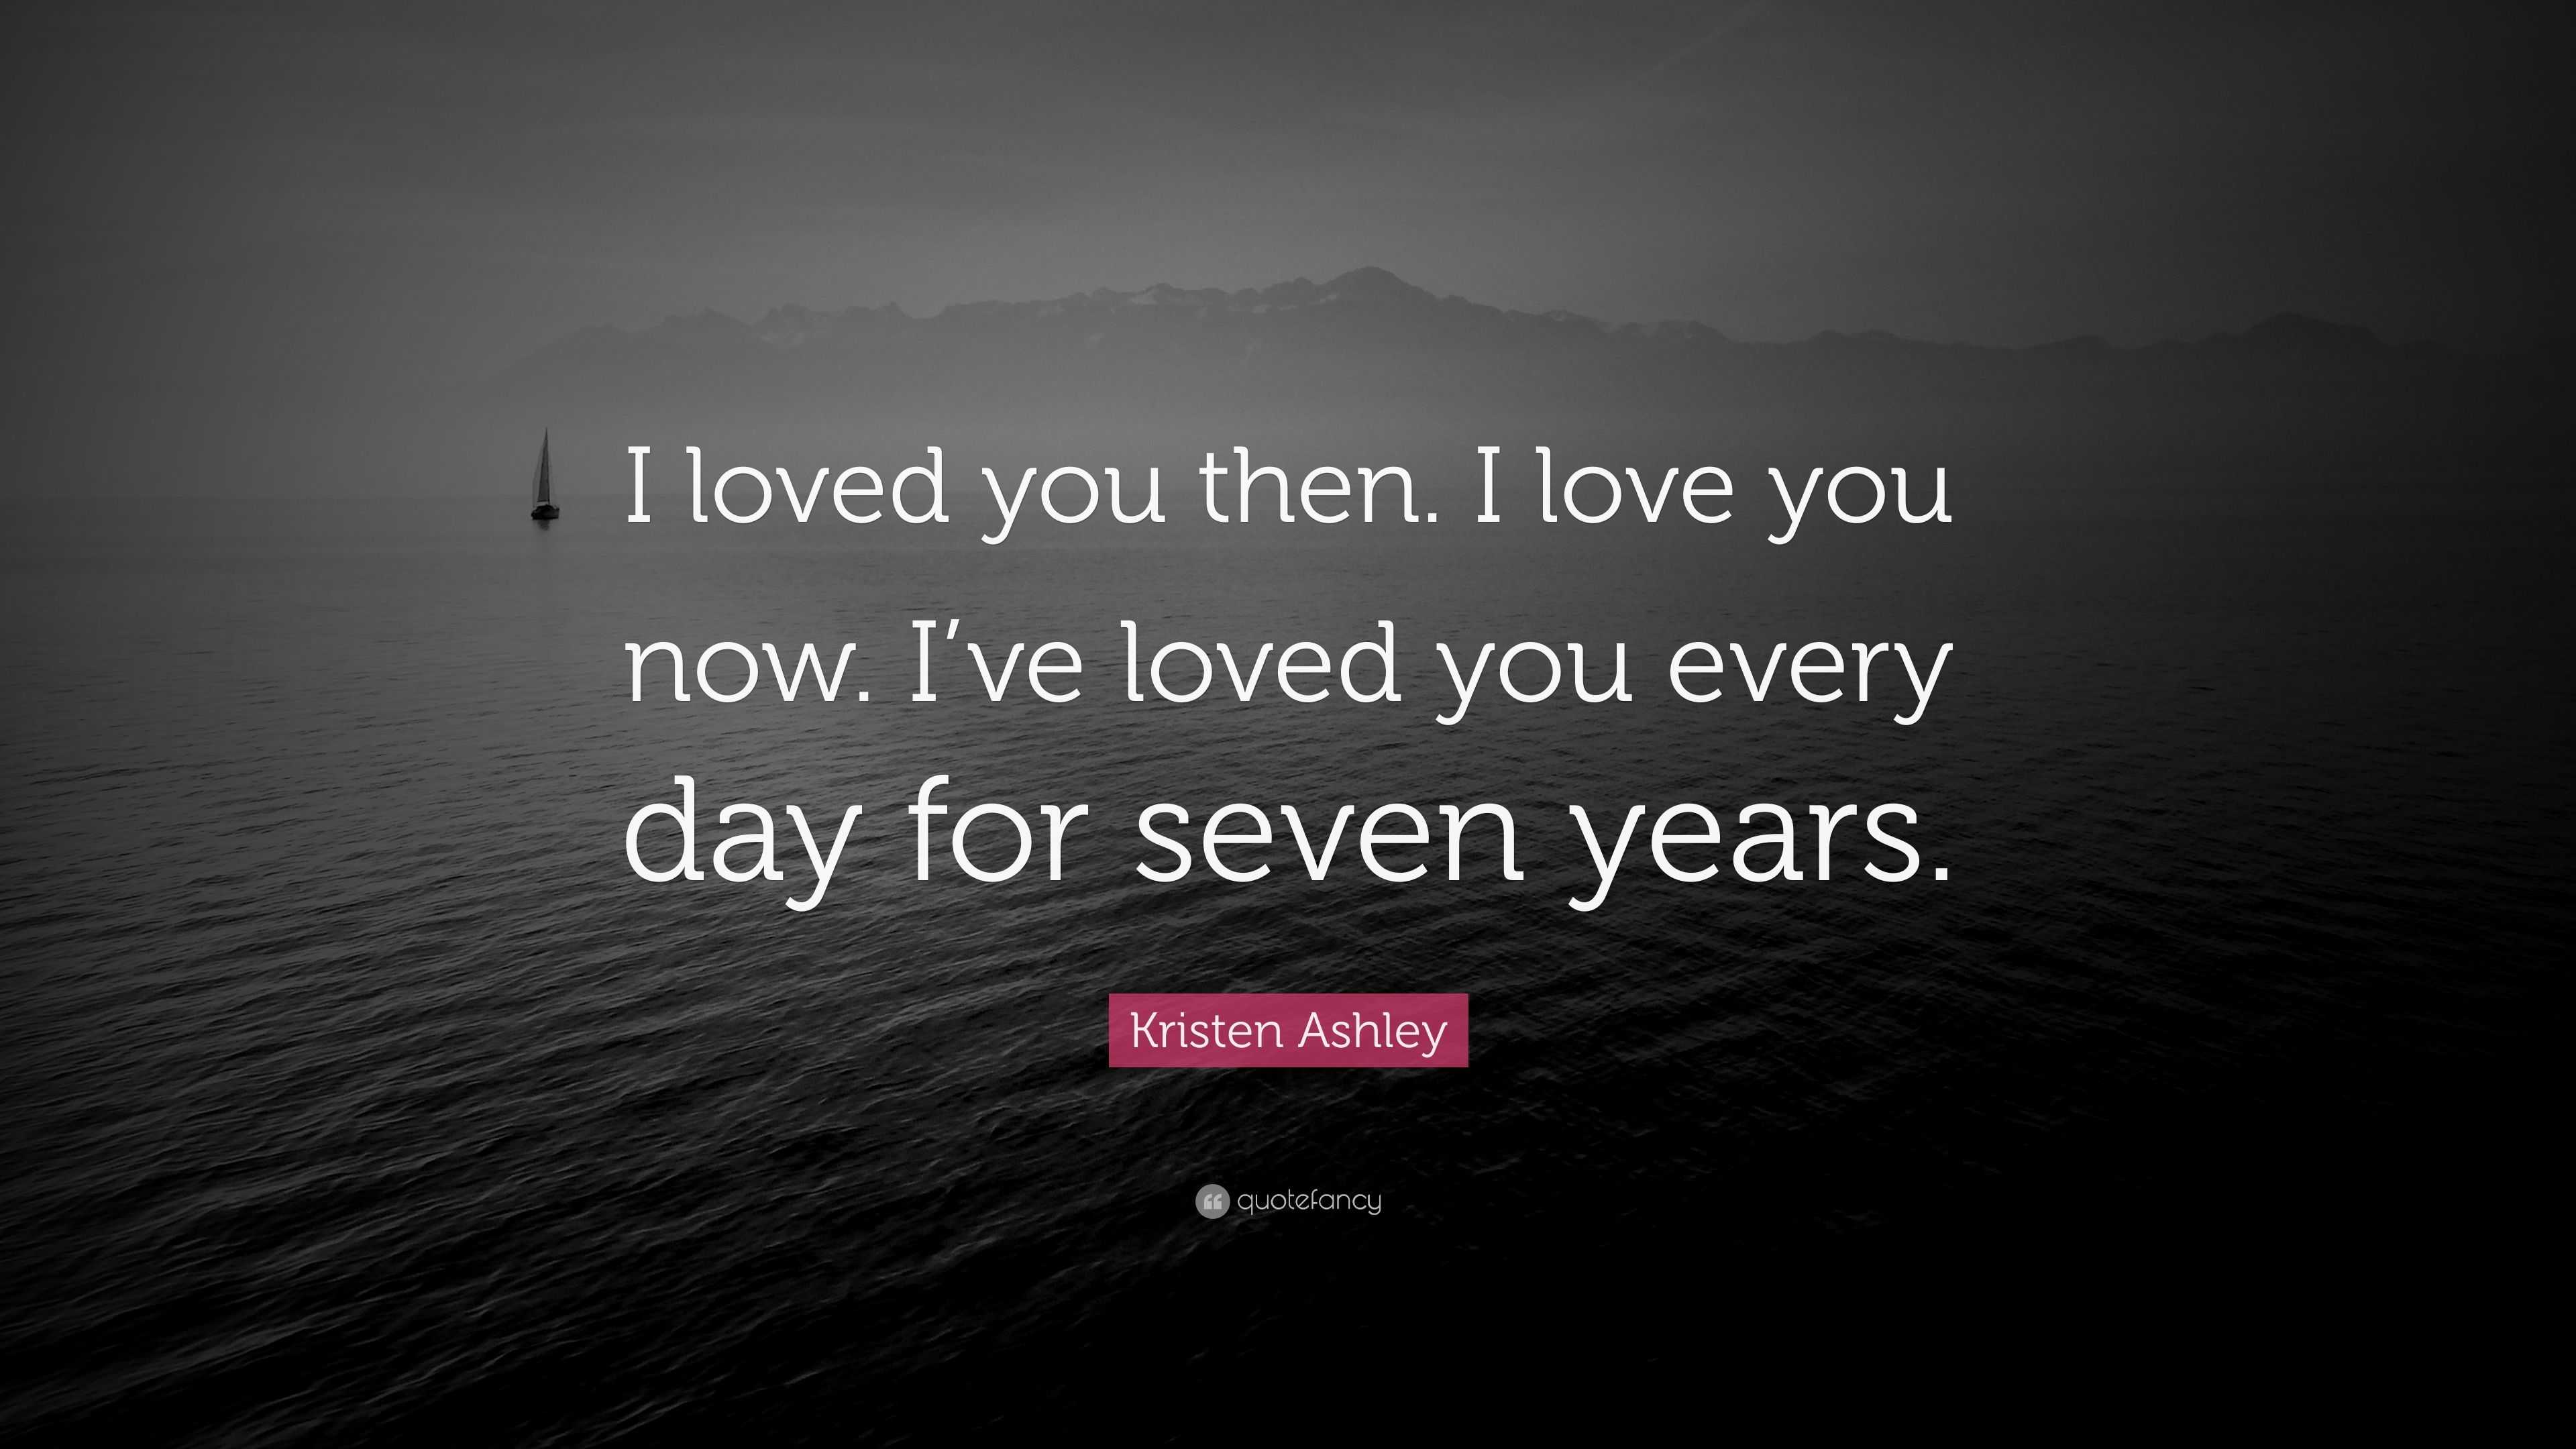 Kristen Ashley Quote: "I loved you then. I love you now. I ...